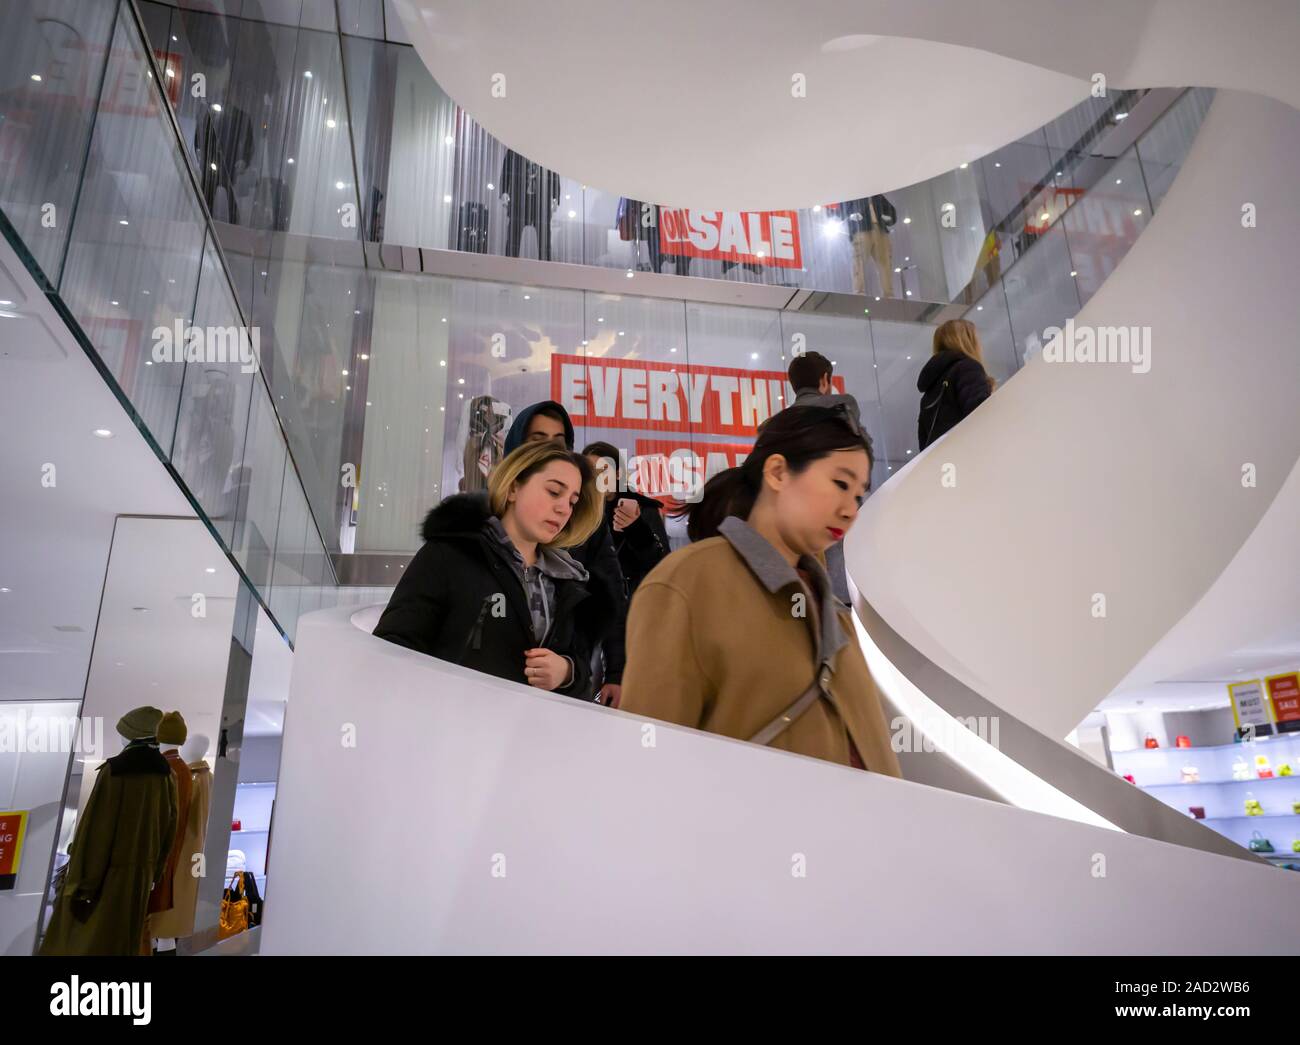 The Barneys store on Seventh Avenue in New York is festooned with signs informing loyal fans that the store is liquidating, seen on Saturday, November 23, 2019. The iconic fashion outposts were sold to B. Riley Financial, liquidation specialists, while the intellectual property went to Authentic Brands Group. (© Richard B. Levine) Stock Photo